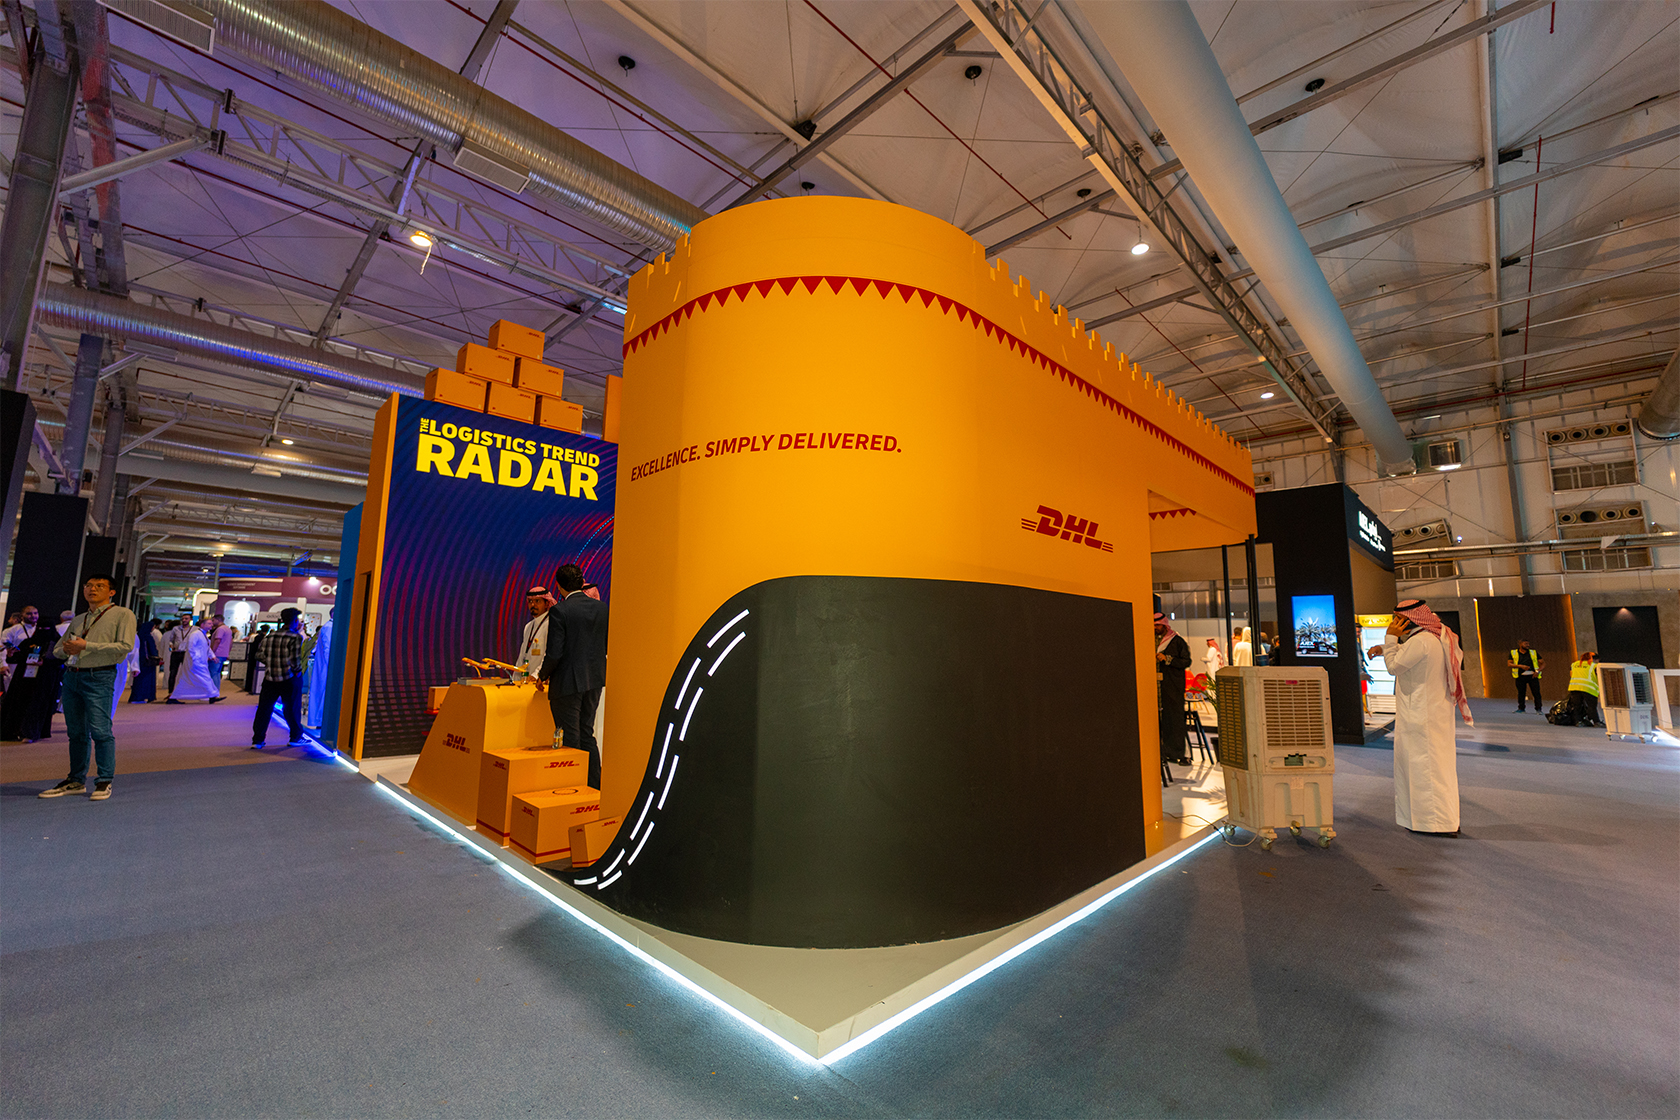 Booth for DHL with slogan print